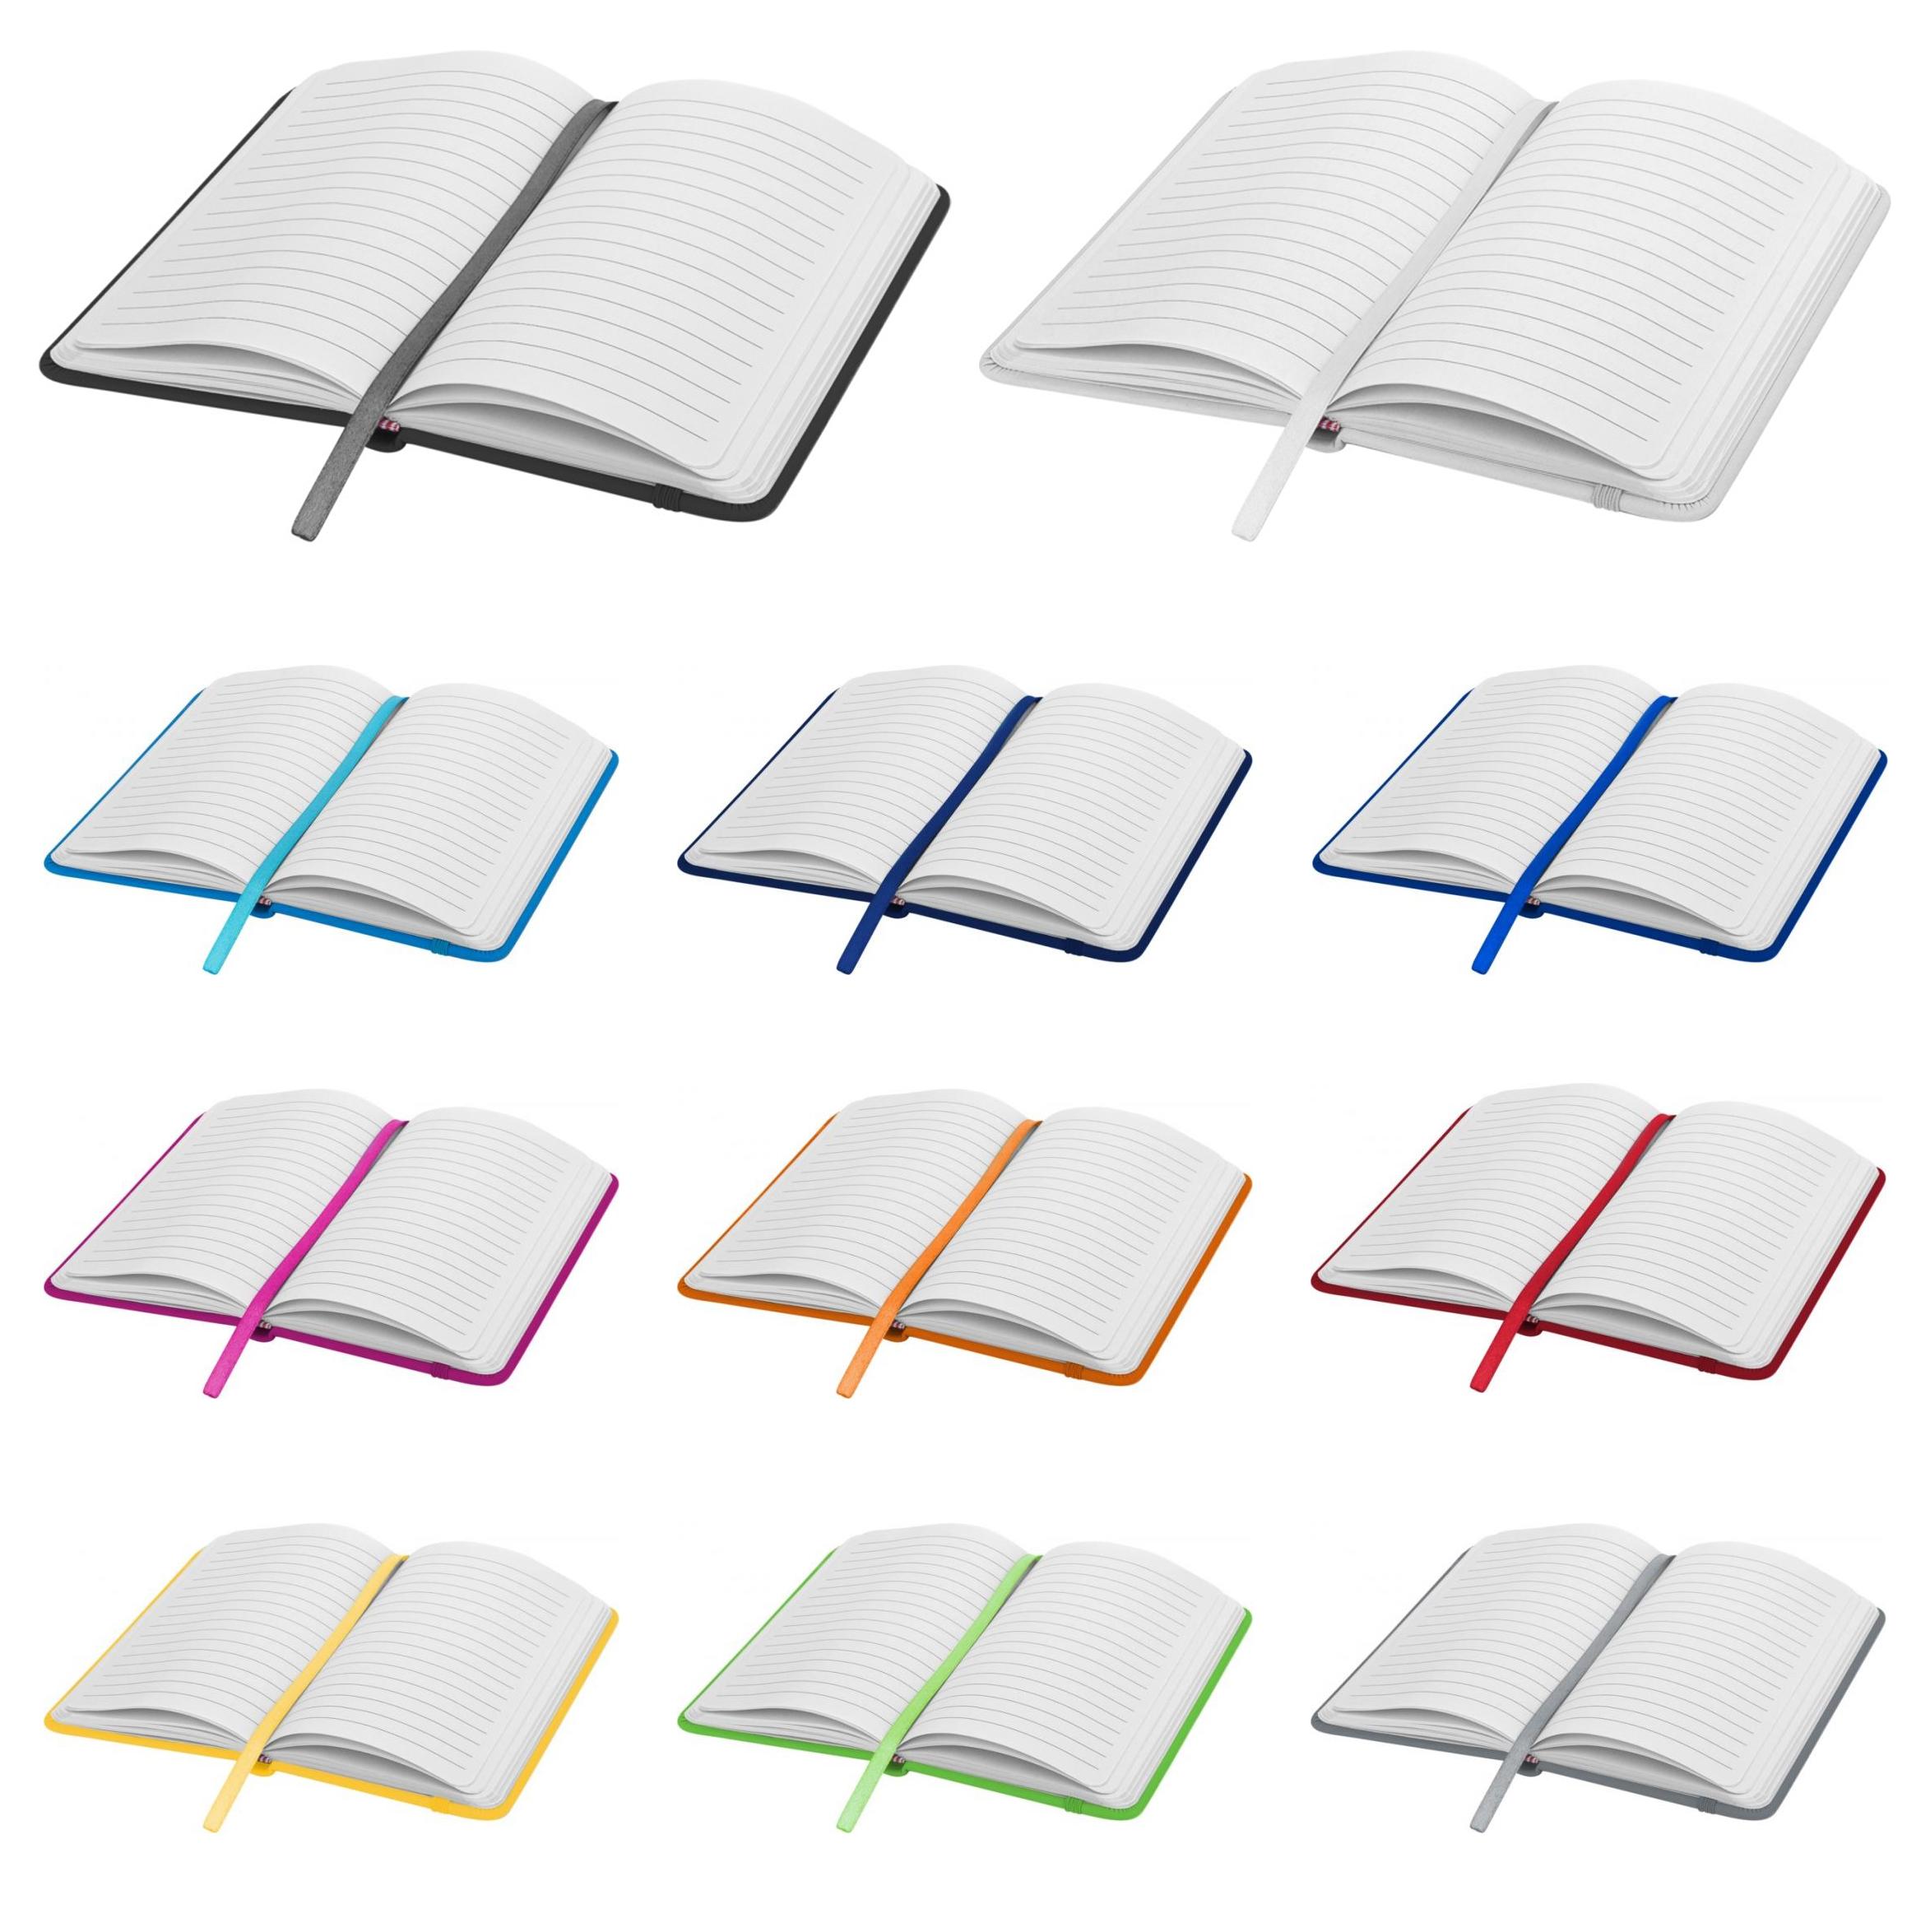 Lined paper notebook sheets